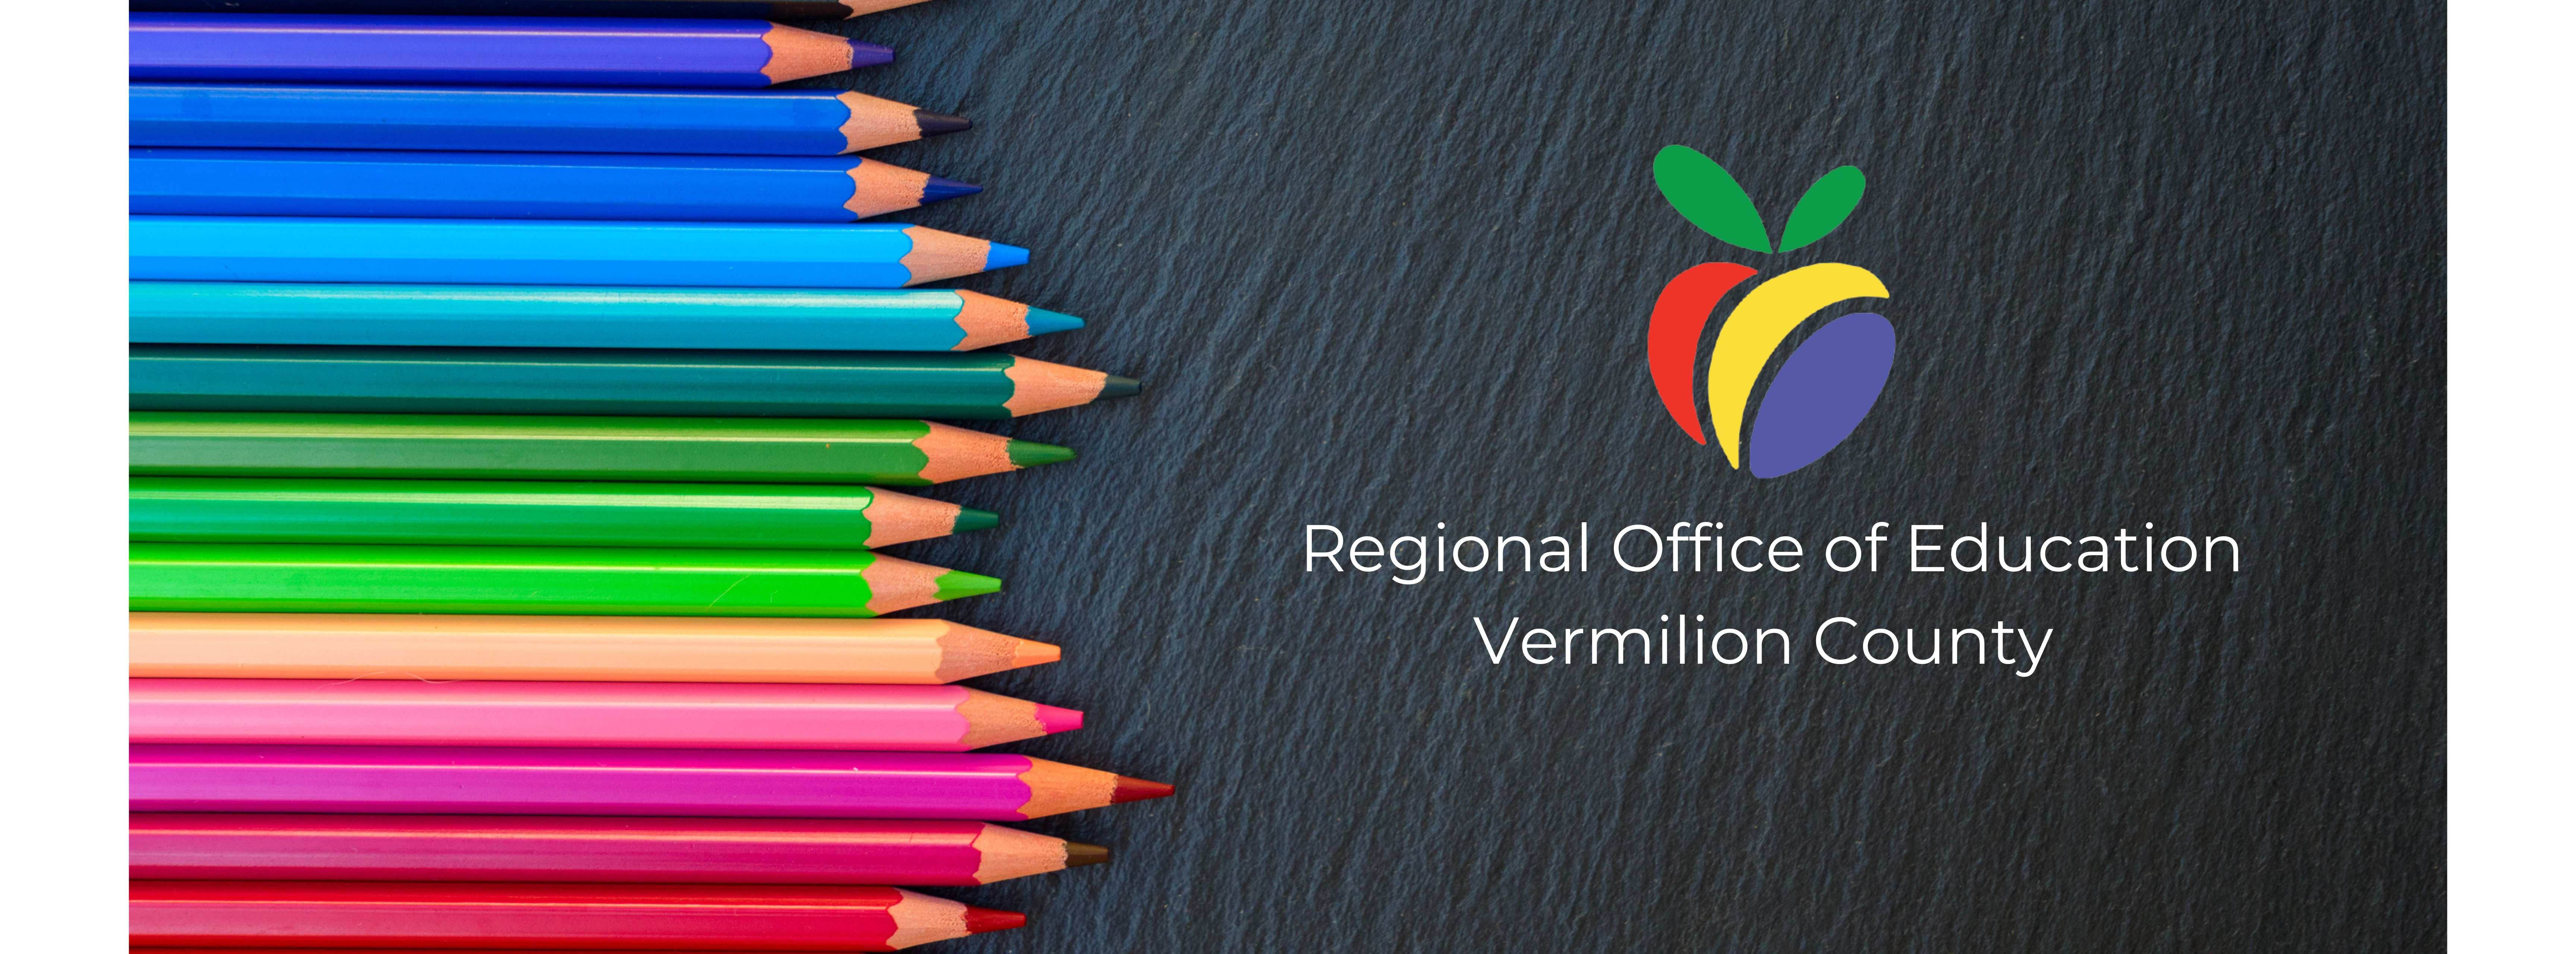 vermilion county regional office of education